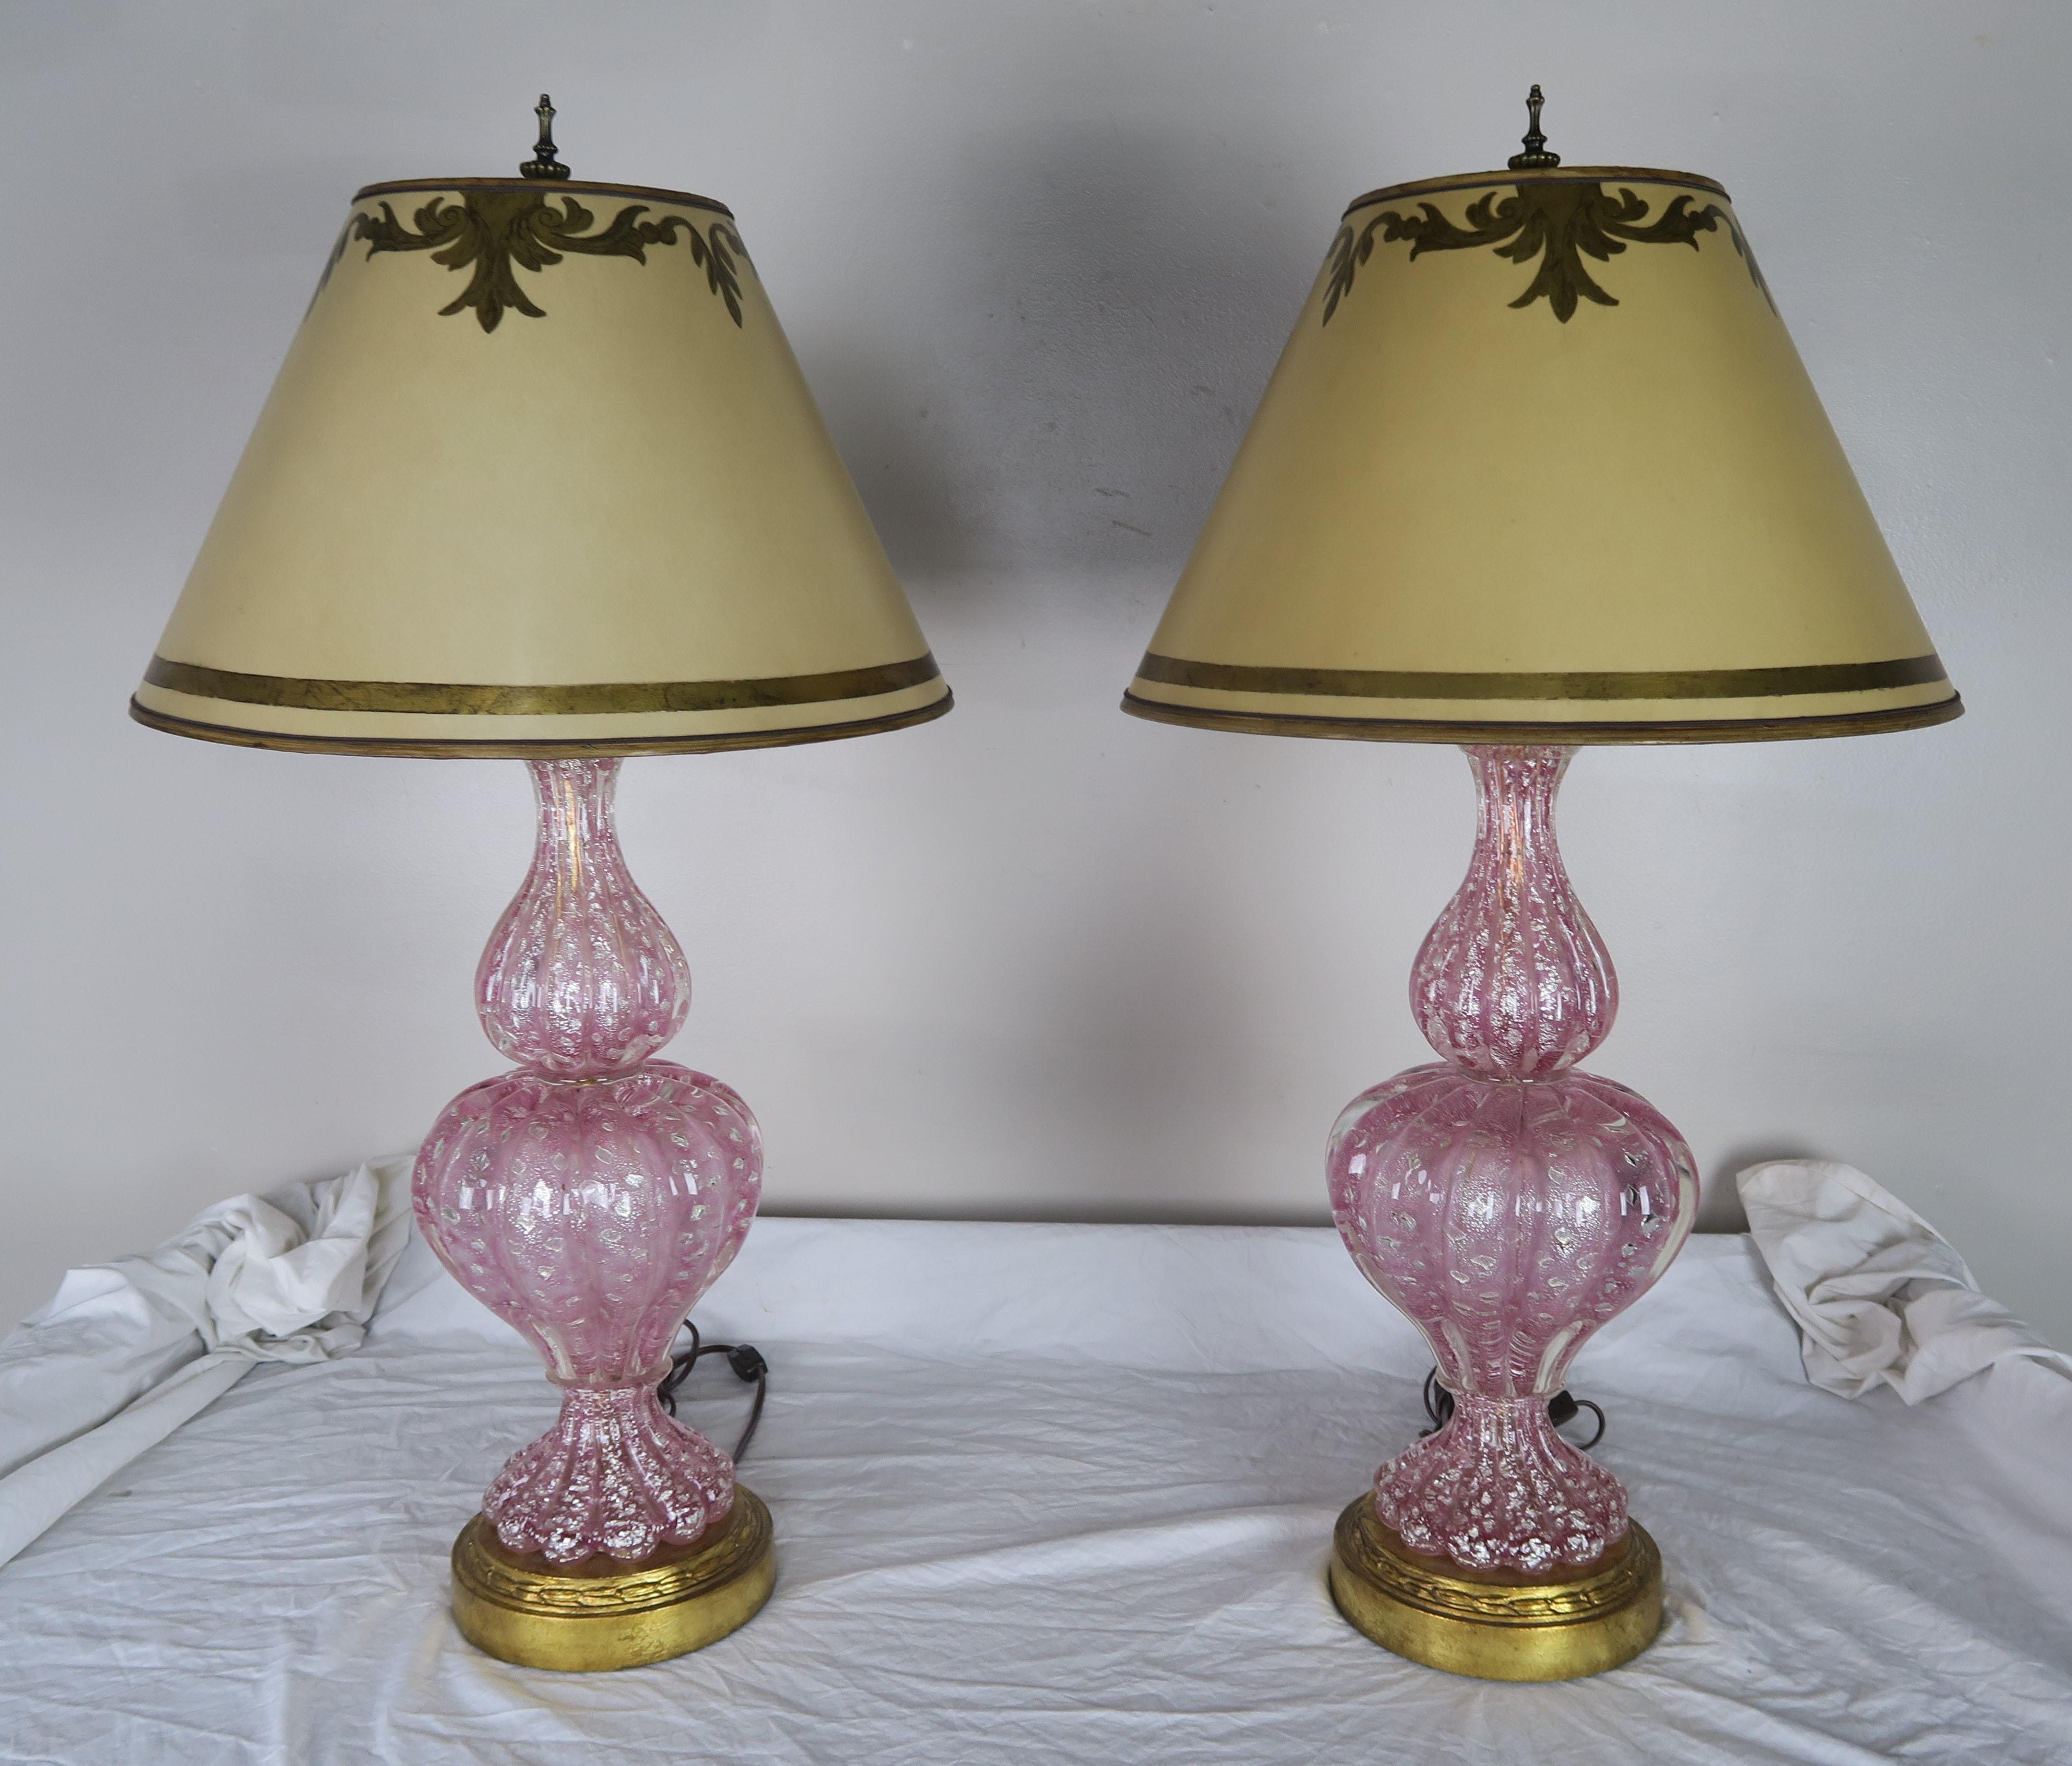 Pair of hand blown soft pink colored Murano lamps on gold leaf bases. The lamps are crowned with hand painted parchment shades. The lamps are newly rewired and are ready to install.